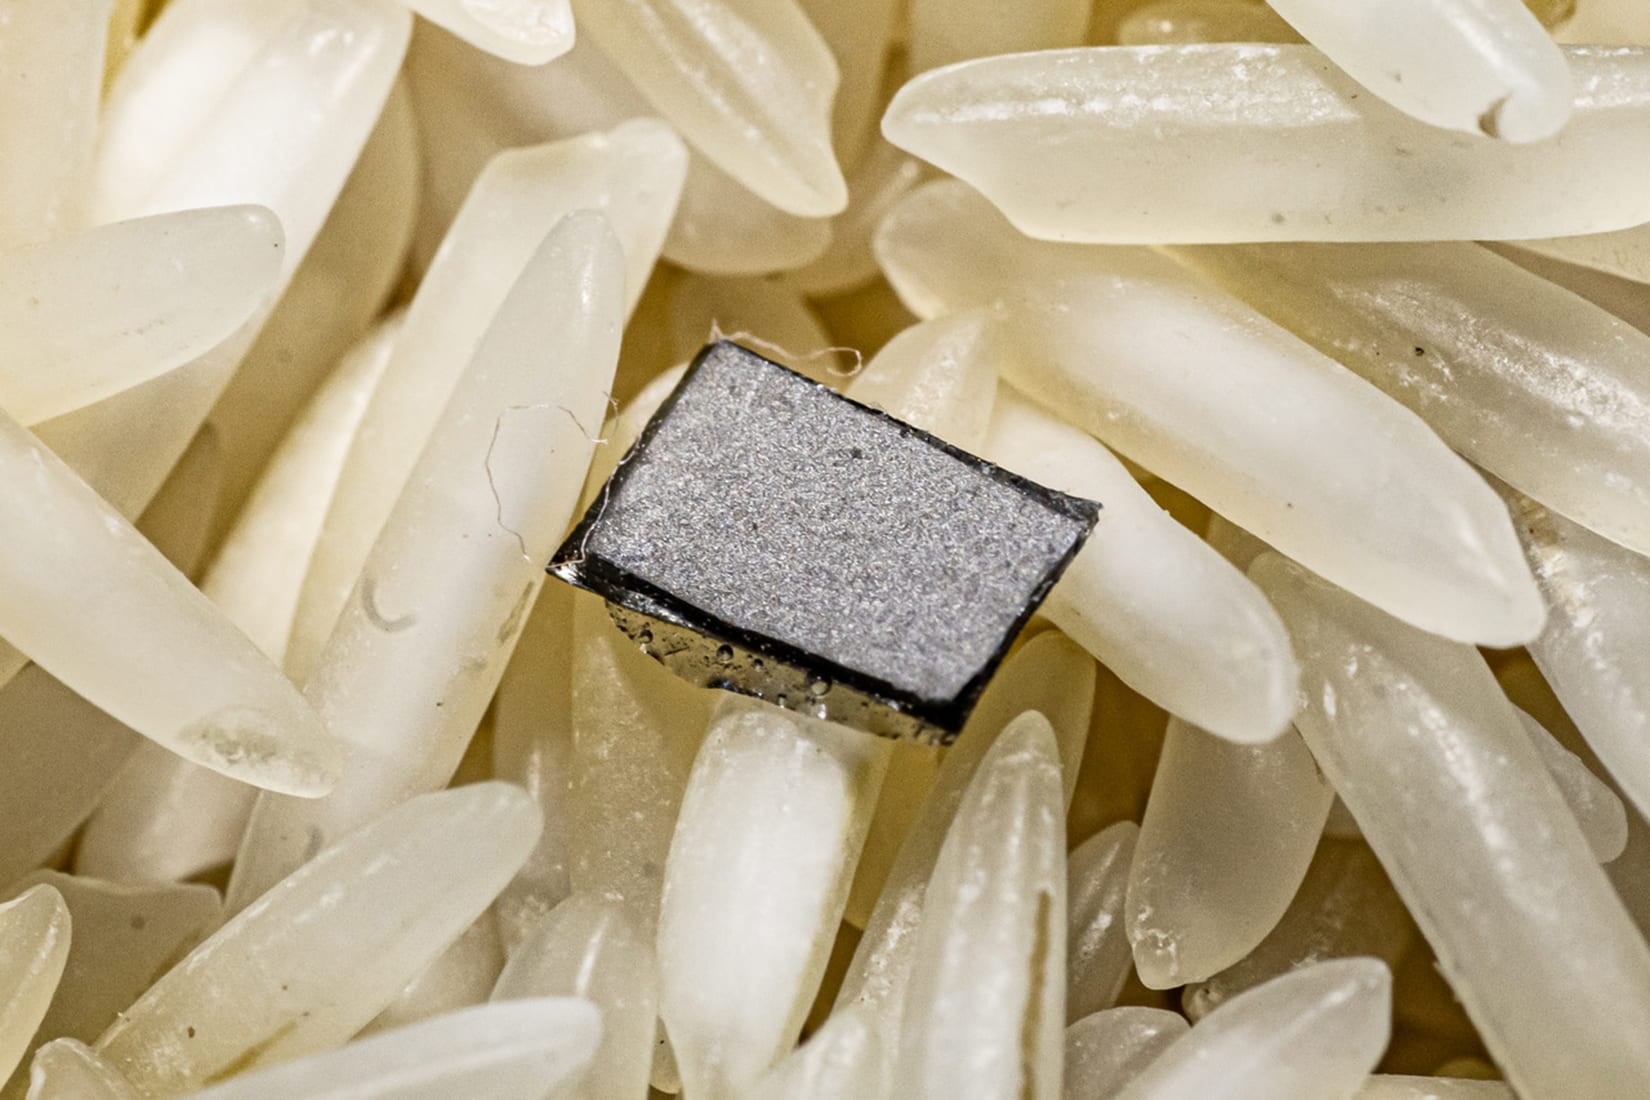 A sample of Rice University’s “magnetoelectric” film atop a bed of uncooked rice. Rice neuroengineers created the bi-layered film to power implantable neural stimulators that are approximately the size of a grain of rice. The film converts energy from a magnetic field directly into an electrical voltage, eliminating the need for a battery or wired power connection. (Photo by Jeff Fitlow/Rice University)